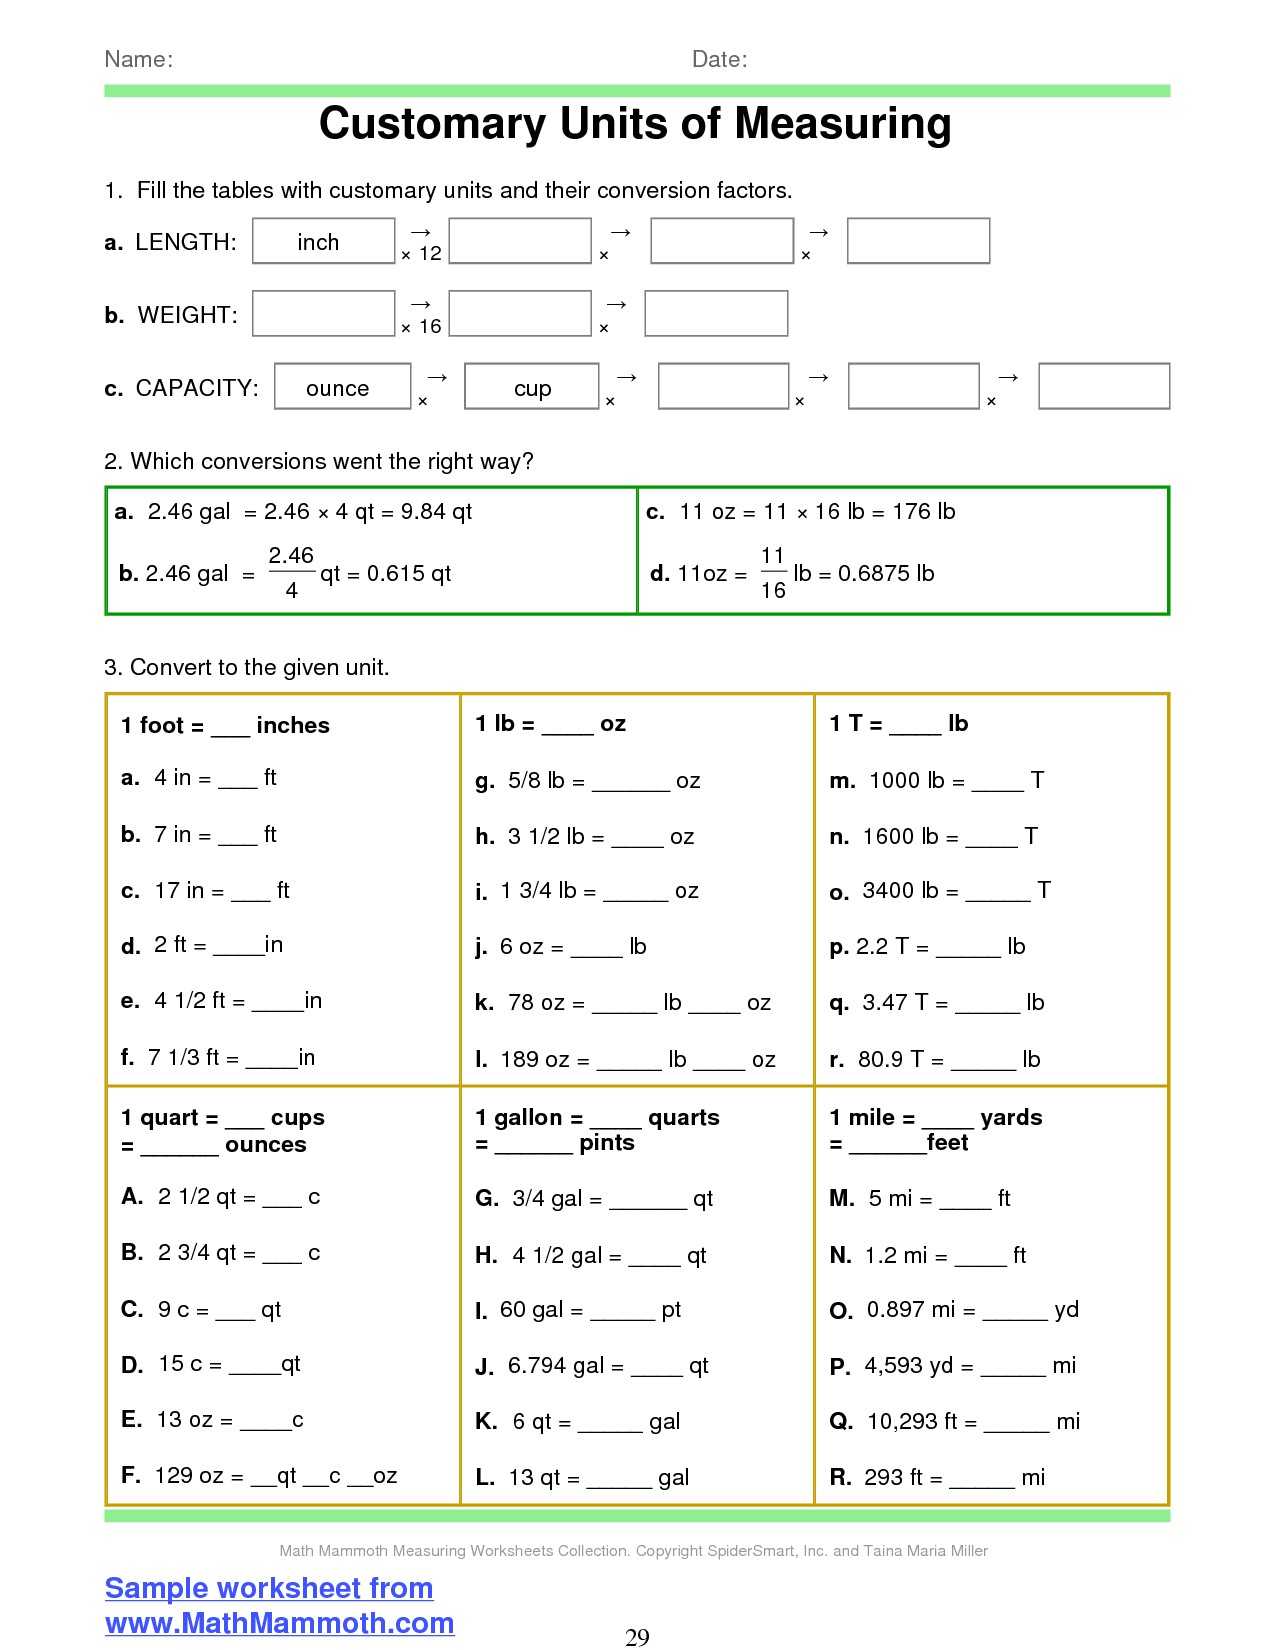 Unit Conversion Worksheet Pdf as Well as Converting Measurement Worksheets Image Collections Worksheet for